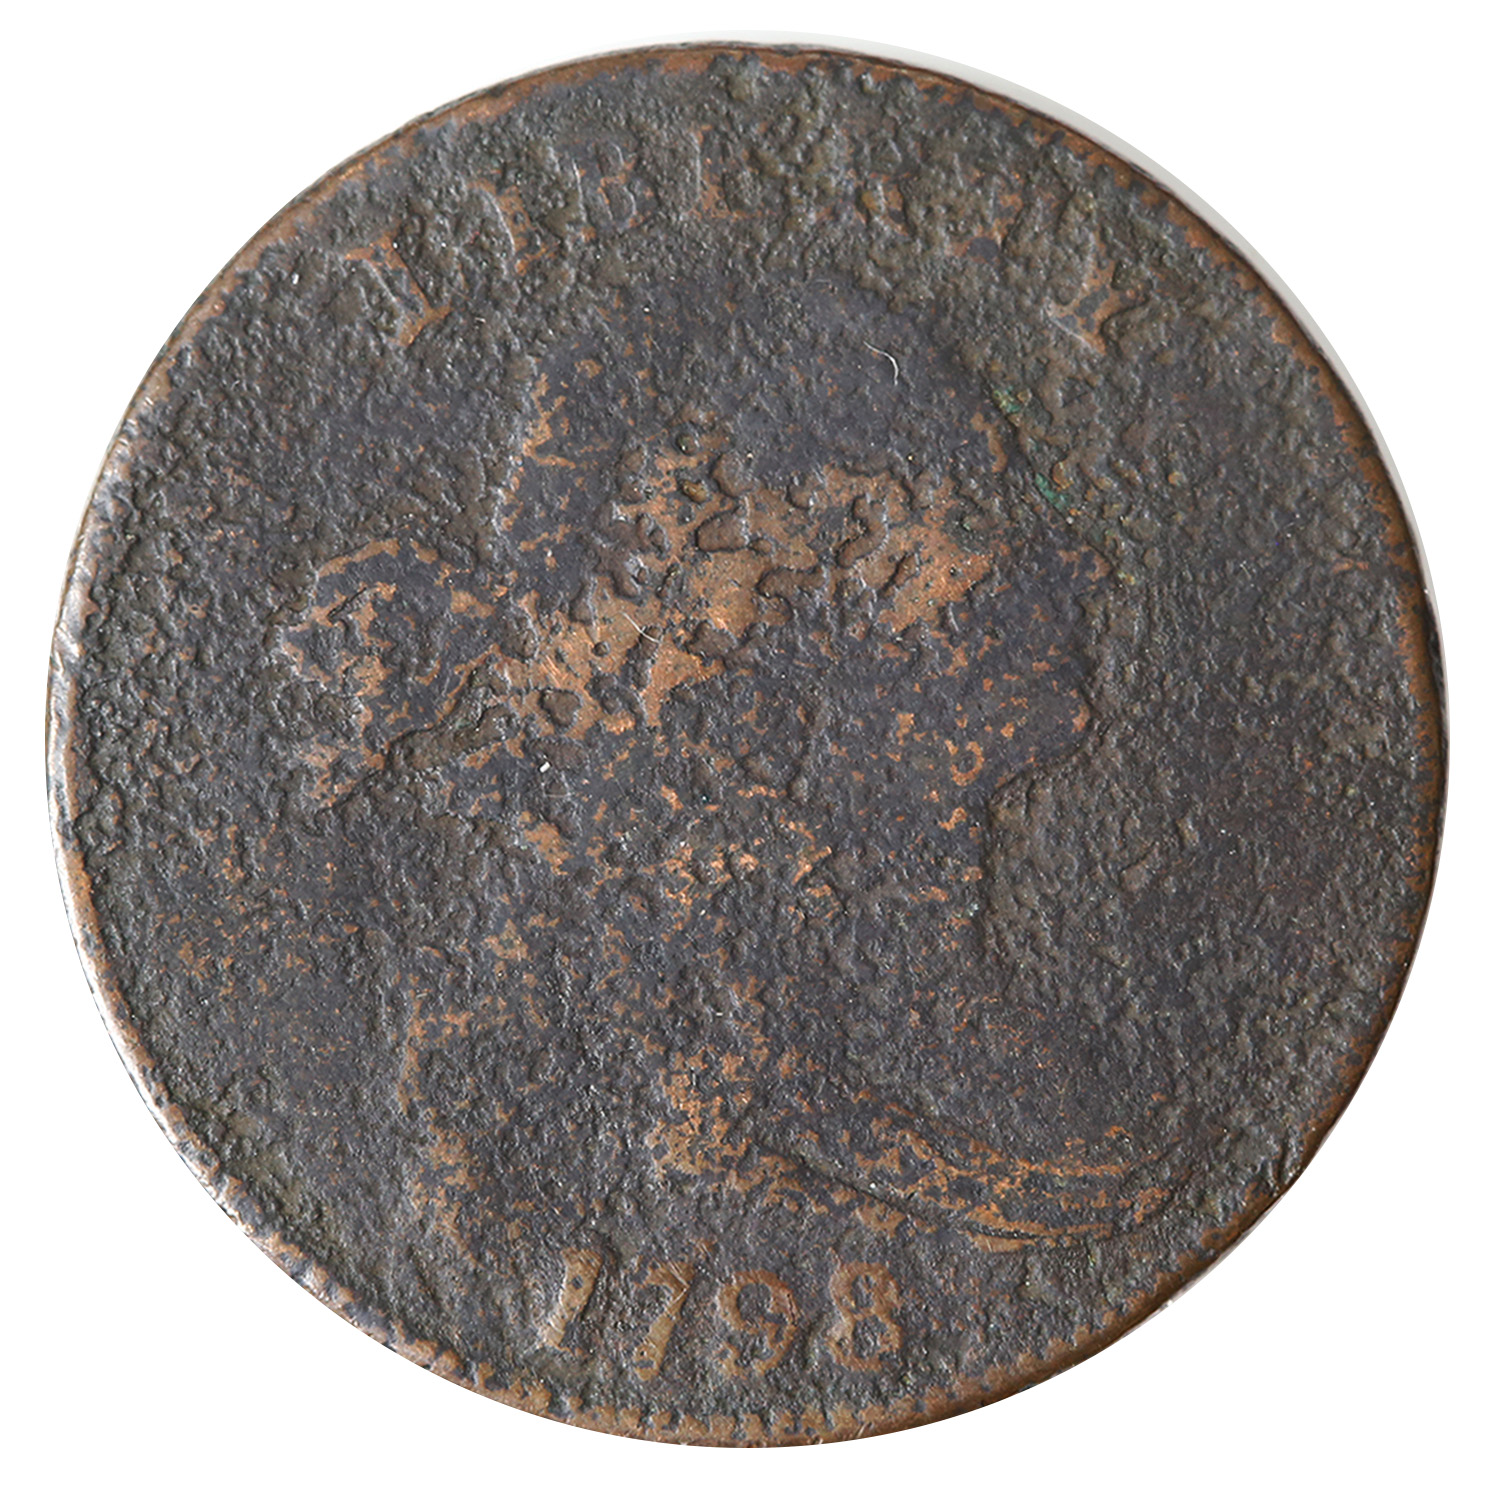 US Large Cent 1798 Draped Bust Hair 2 VG details